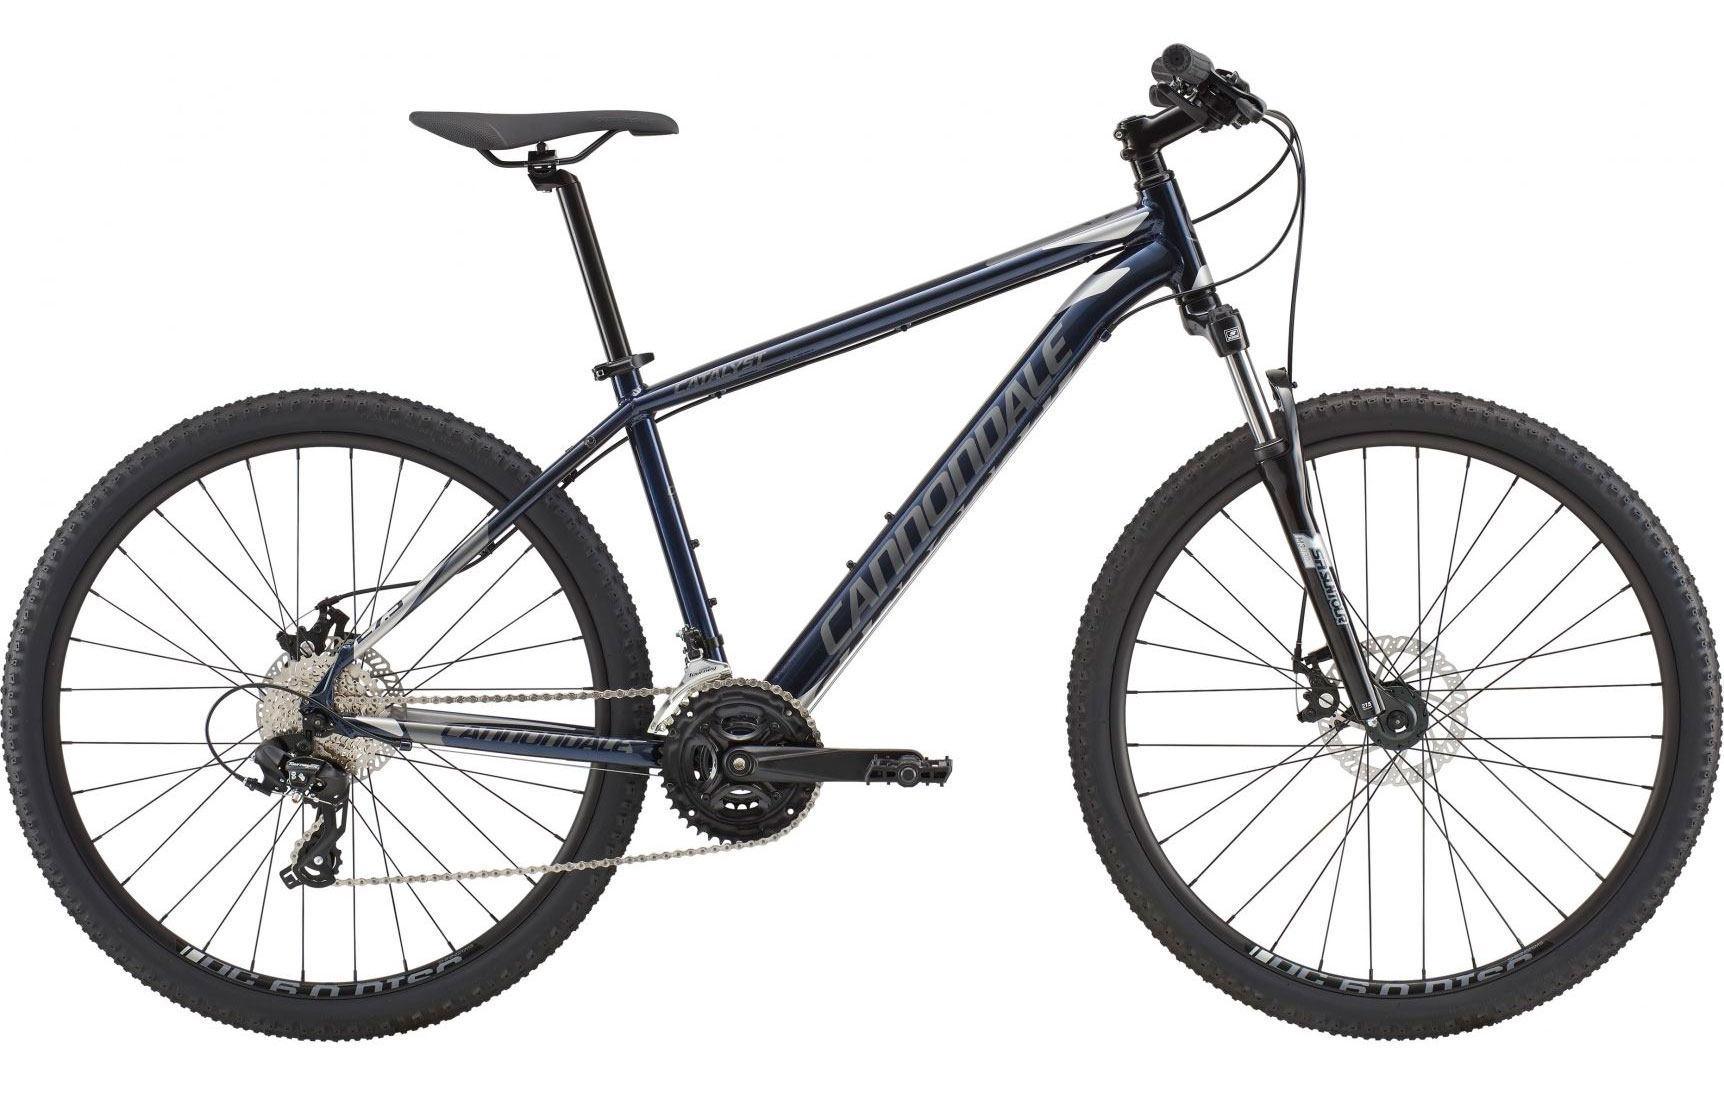 Велосипед 27,5 "Cannondale CATALYST 3 рама - L 2018 MDN фото 